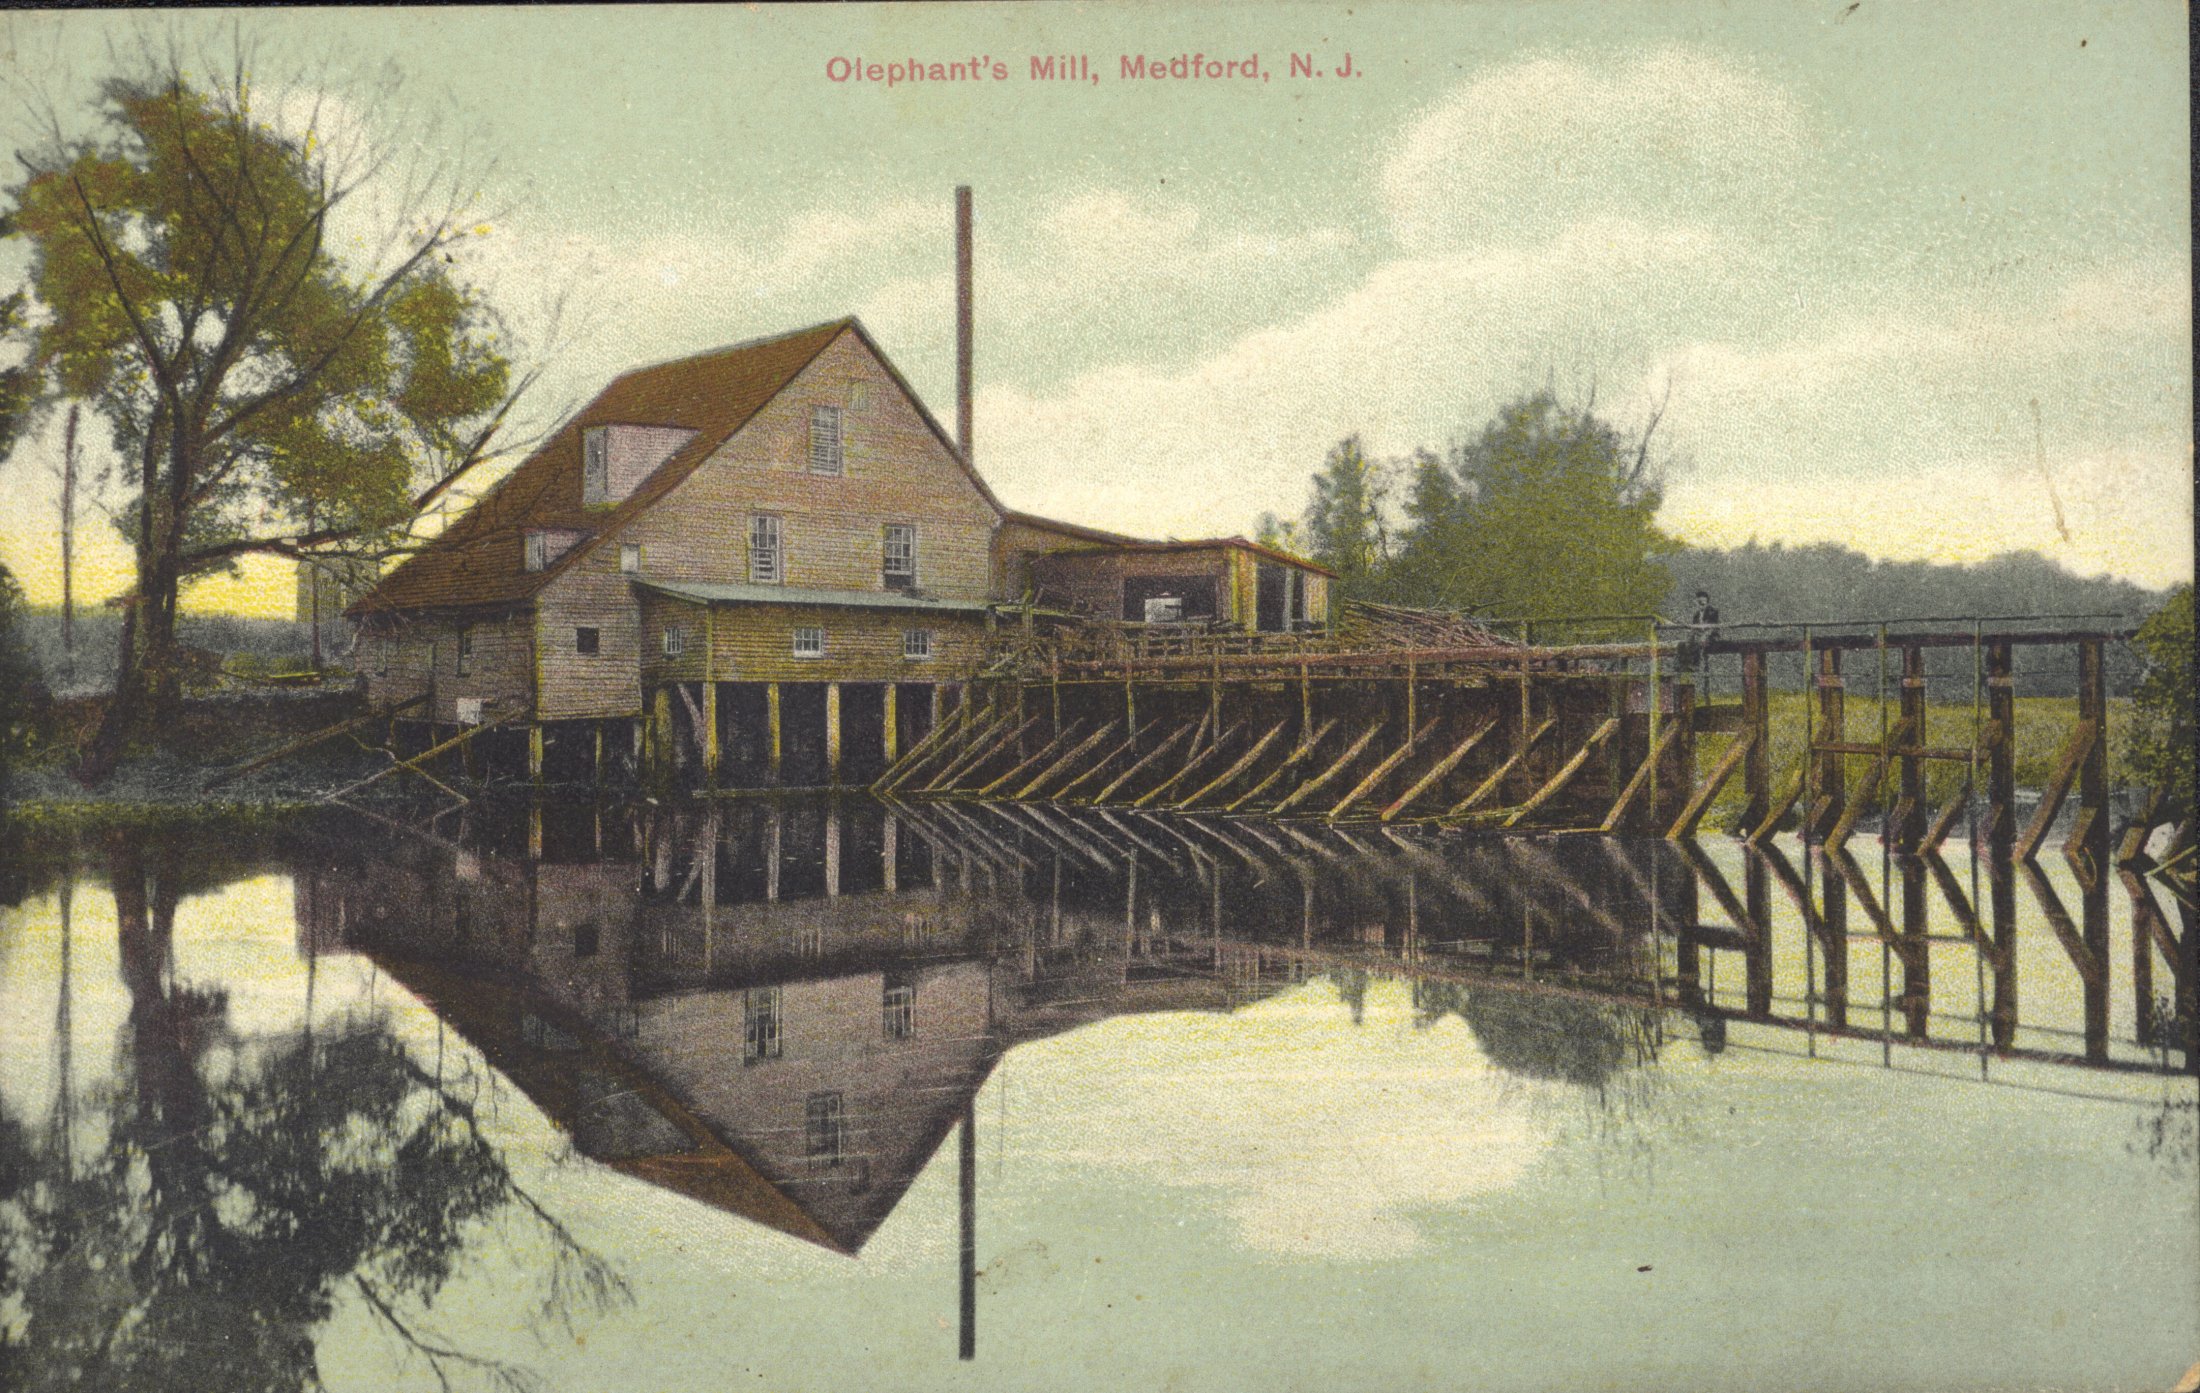 Medford - Oliphants Mill on Haines Creek at the end of Mill Street - c 1910 - RW